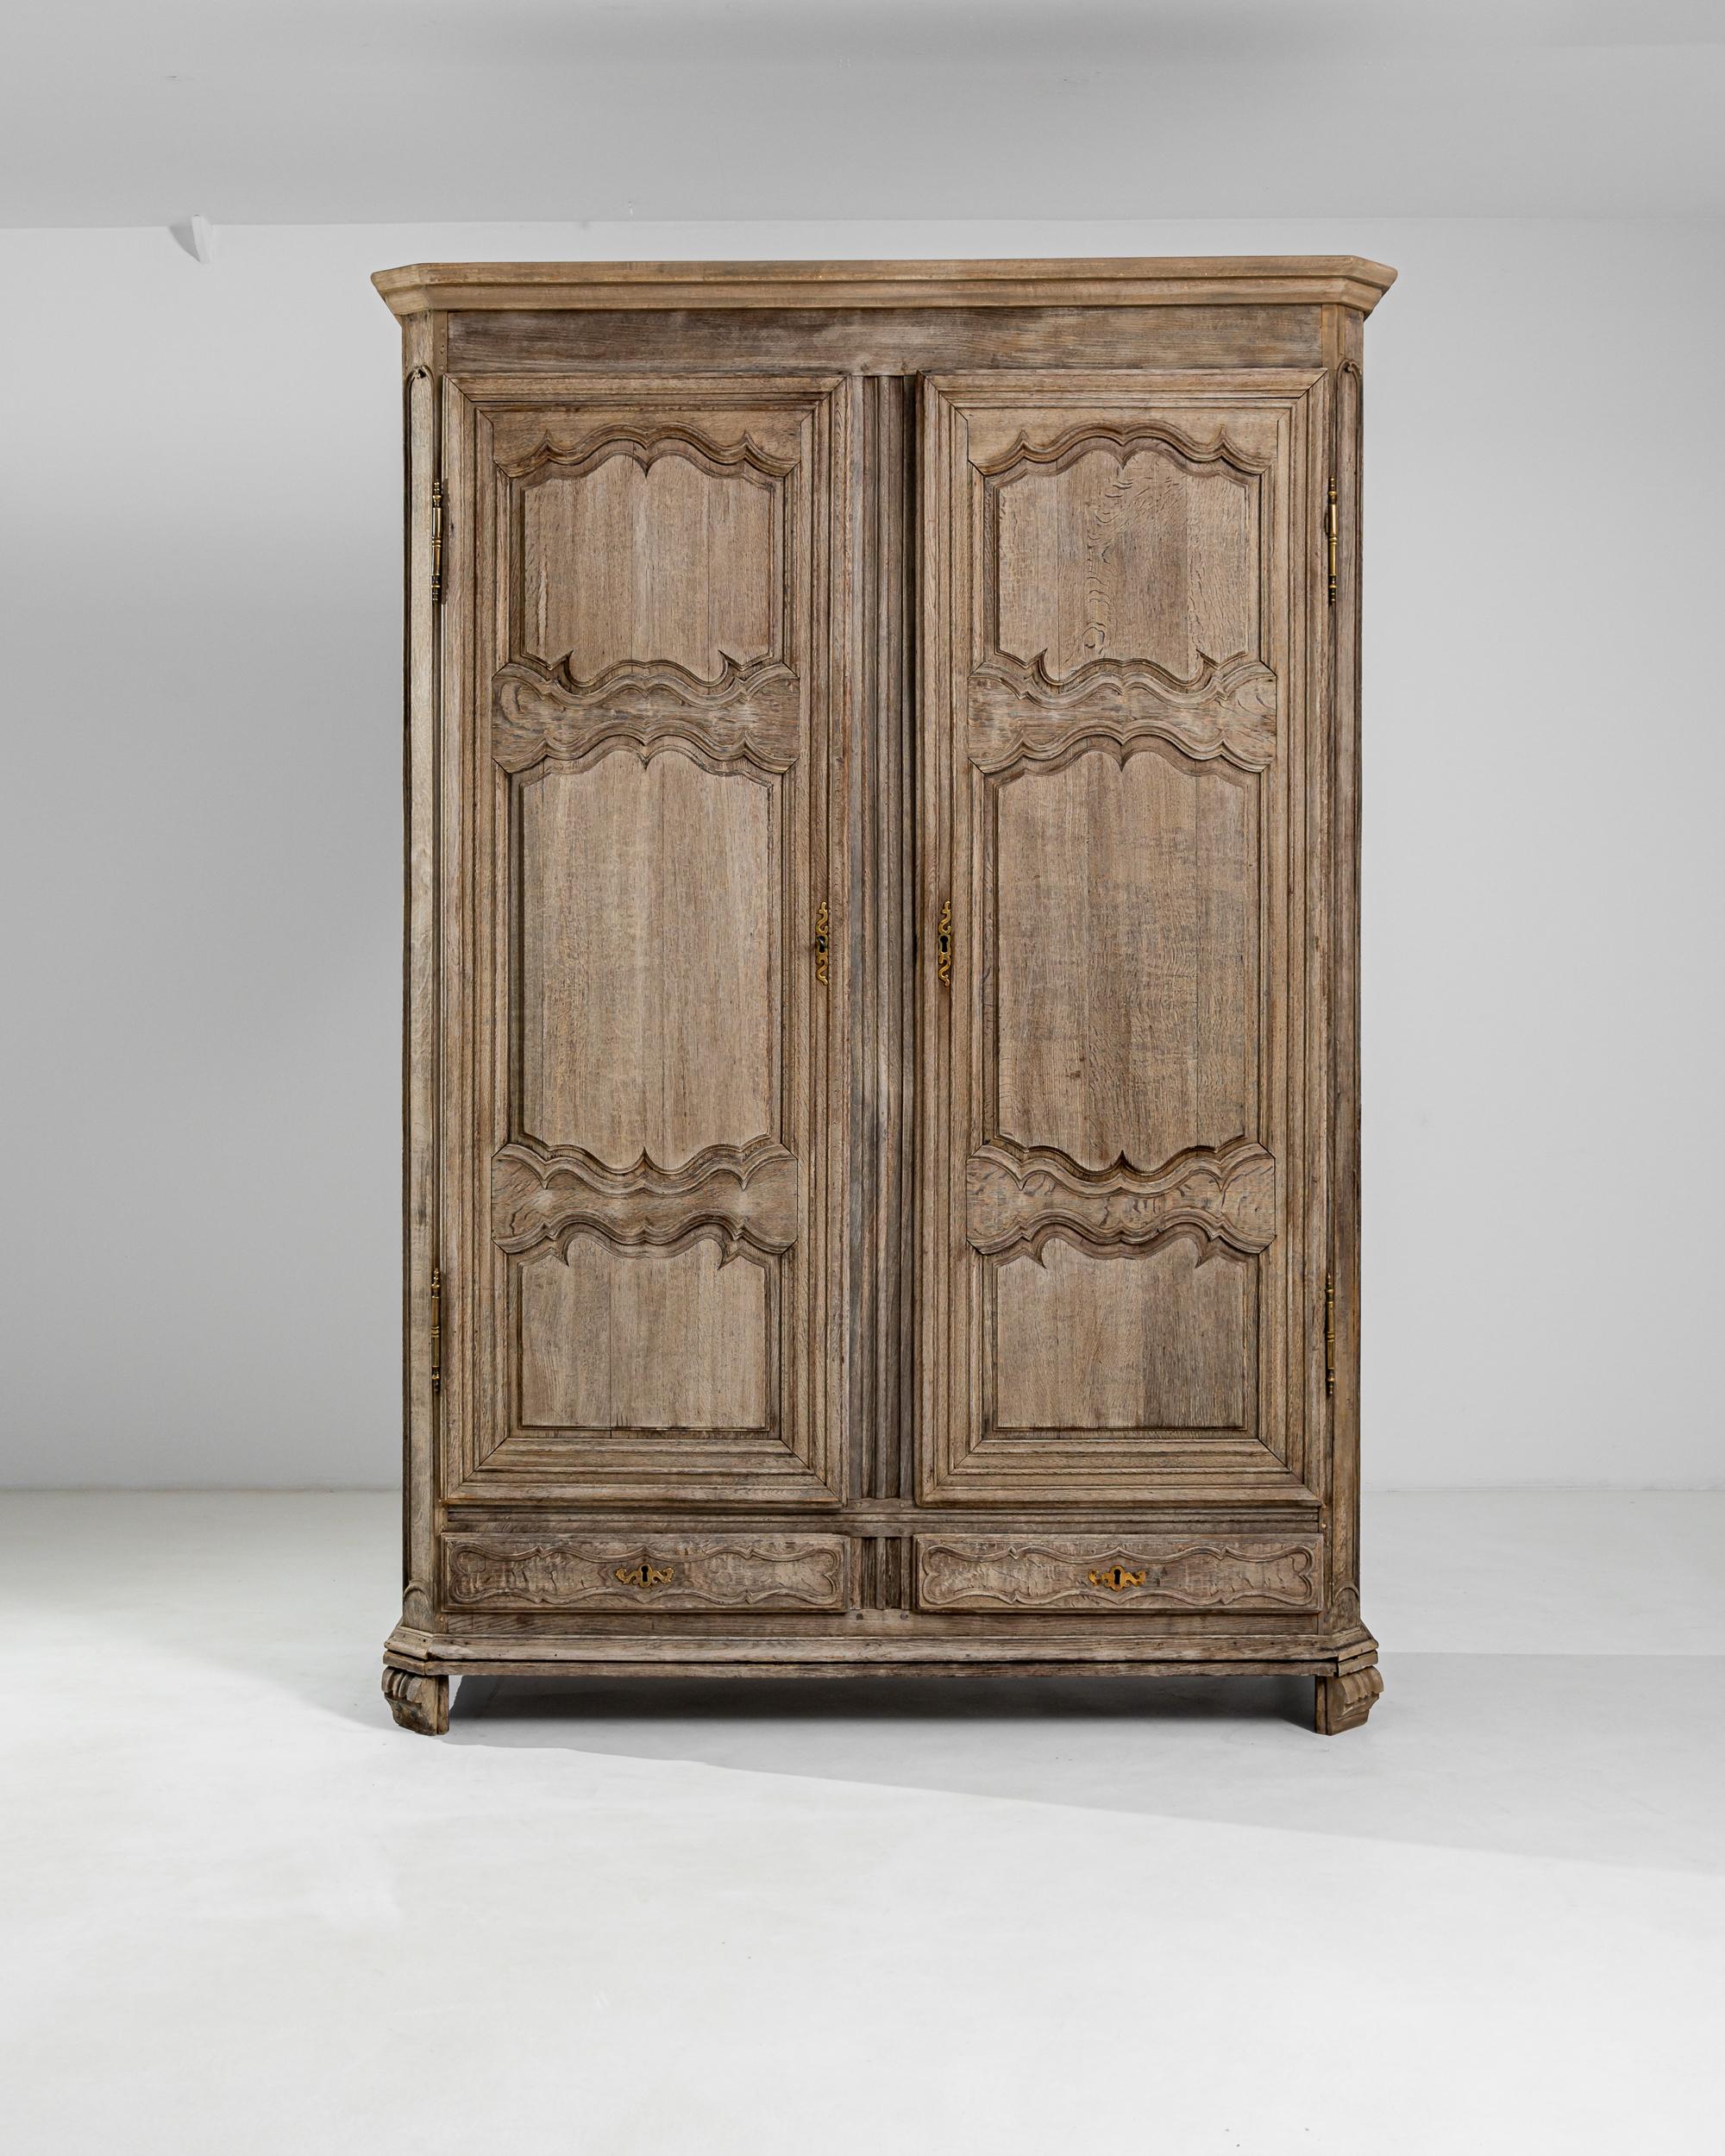 Magnificent cabinetry and statuesque proportions give this antique oak armoire a captivating presence. When it was built in 18th Century France, furniture like this would have been an uncommon luxury —this piece would have certainly been a treasured